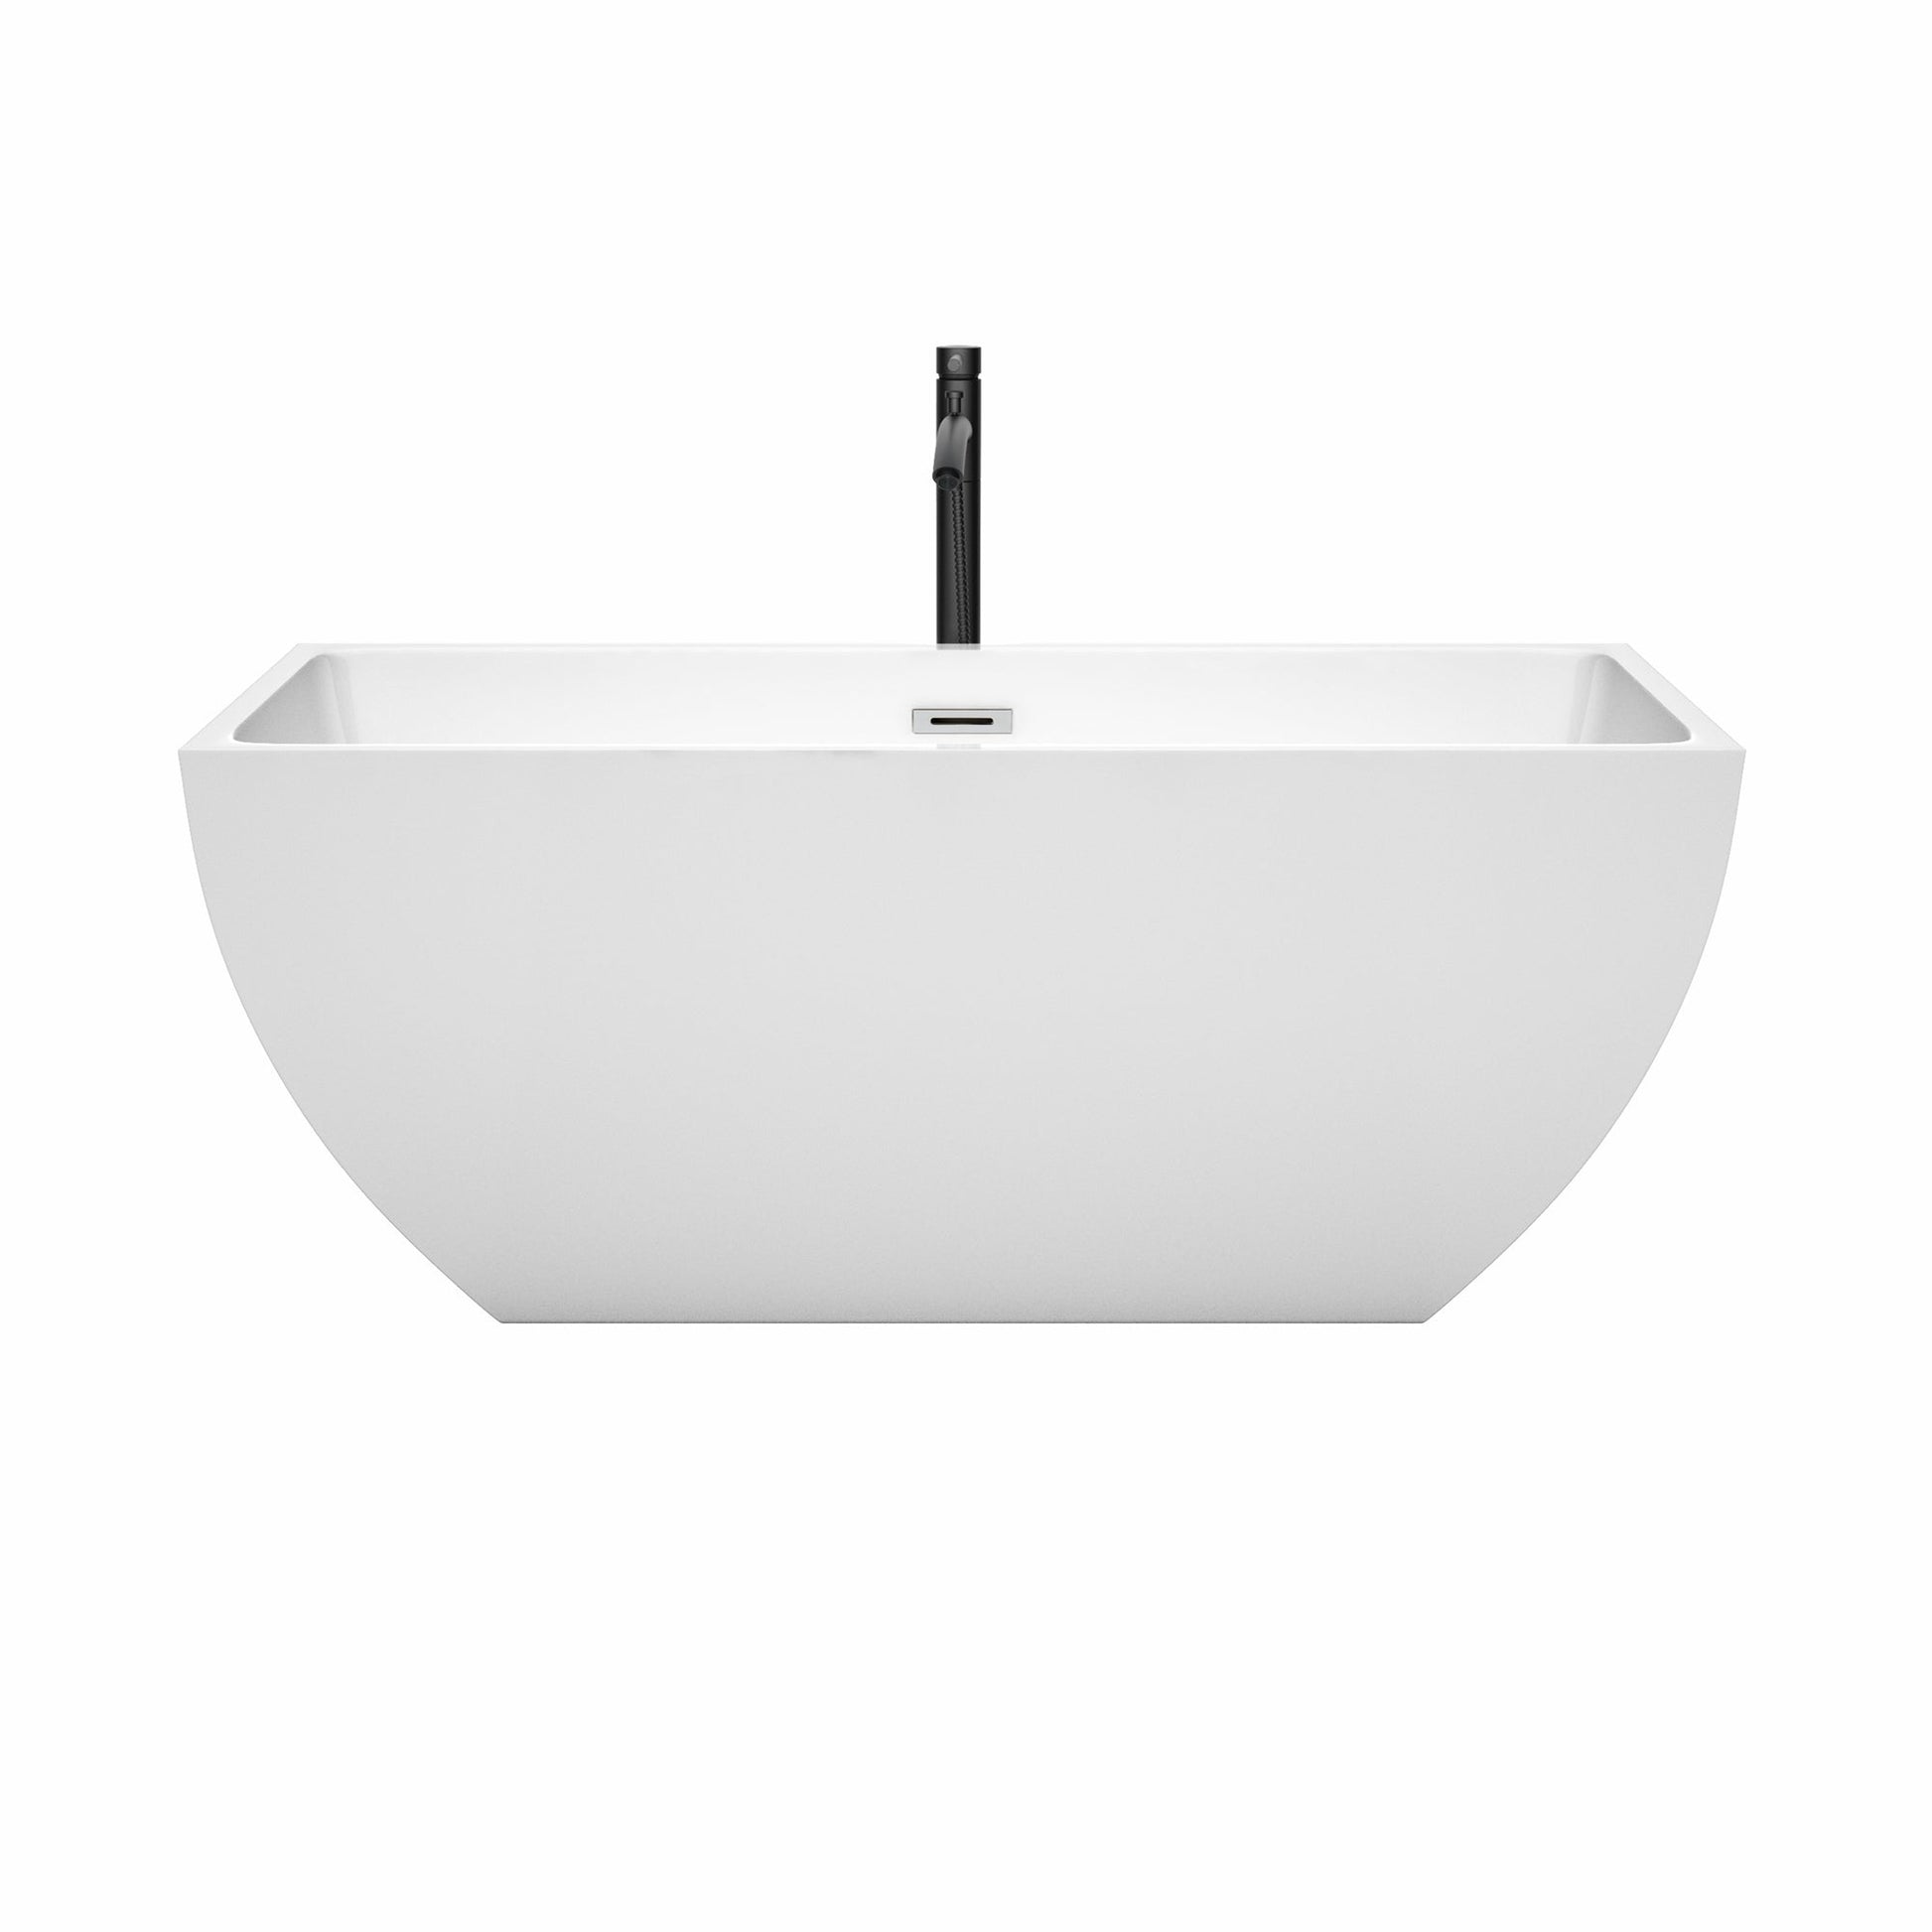 Wyndham Collection Rachel 59" Freestanding Bathtub in White With Polished Chrome Trim and Floor Mounted Faucet in Matte Black